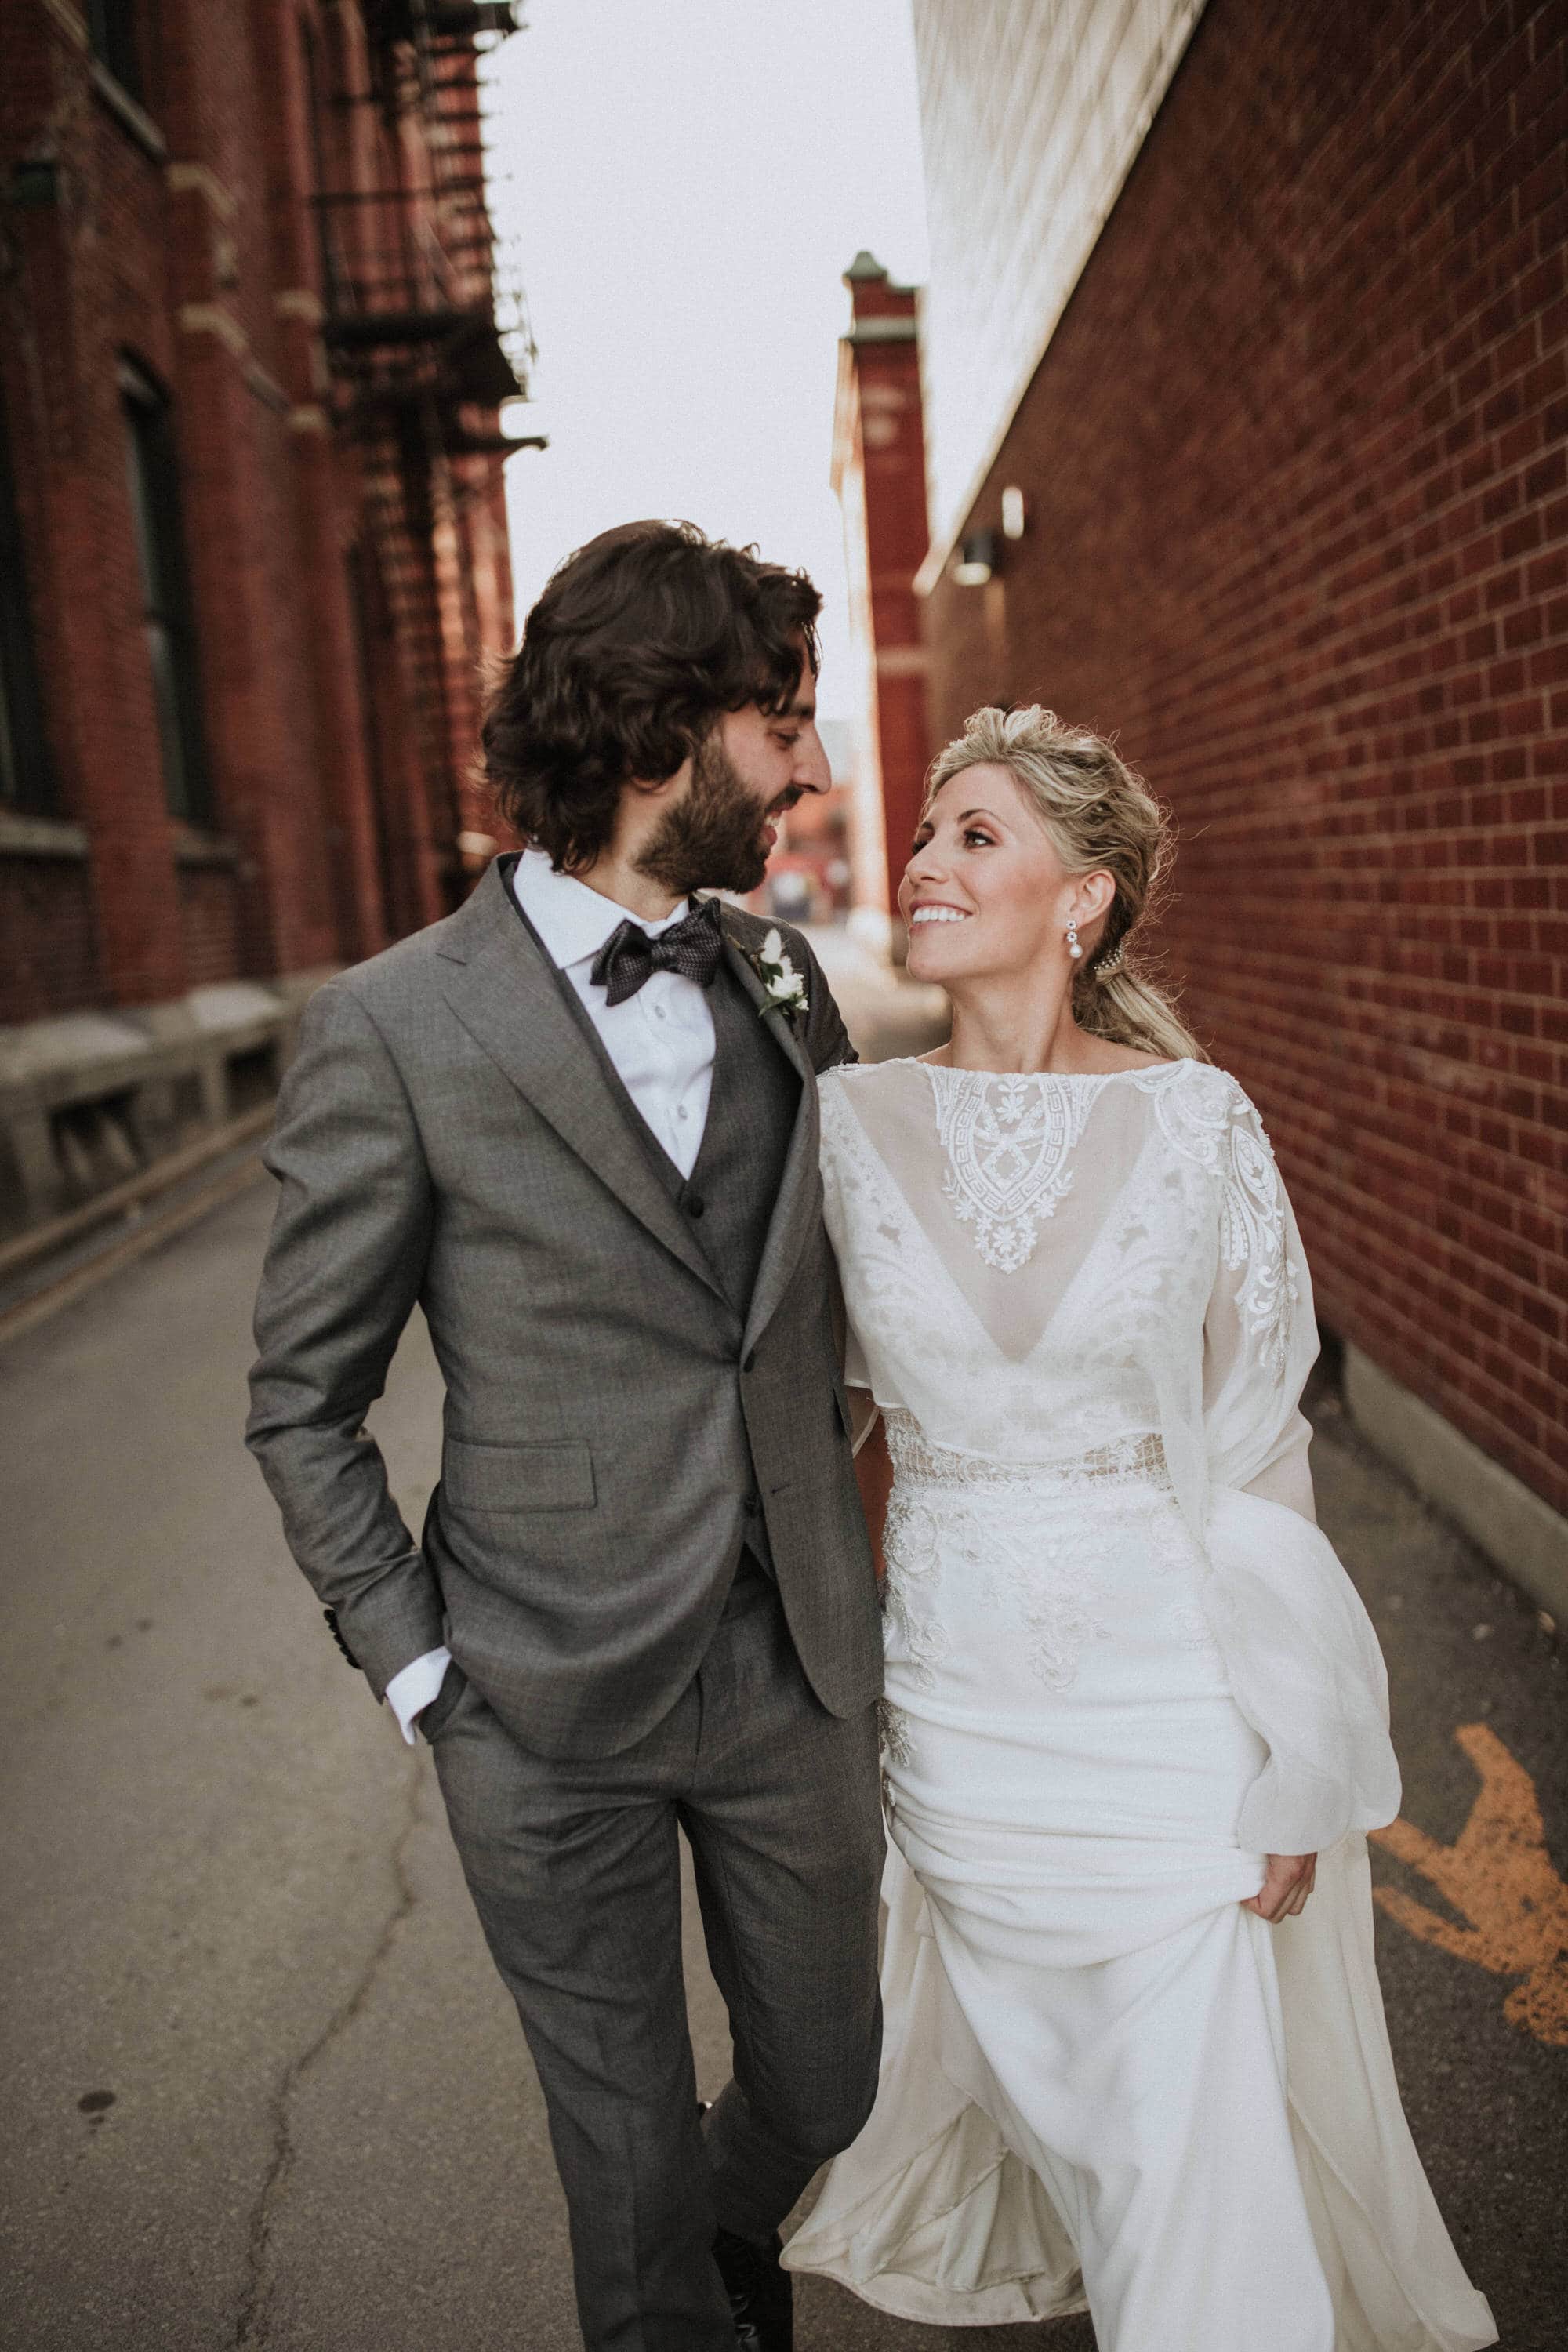 Entrepots Dominion Wedding In Montreal - Alley Portraits - Wedding Photographer Brent Calis